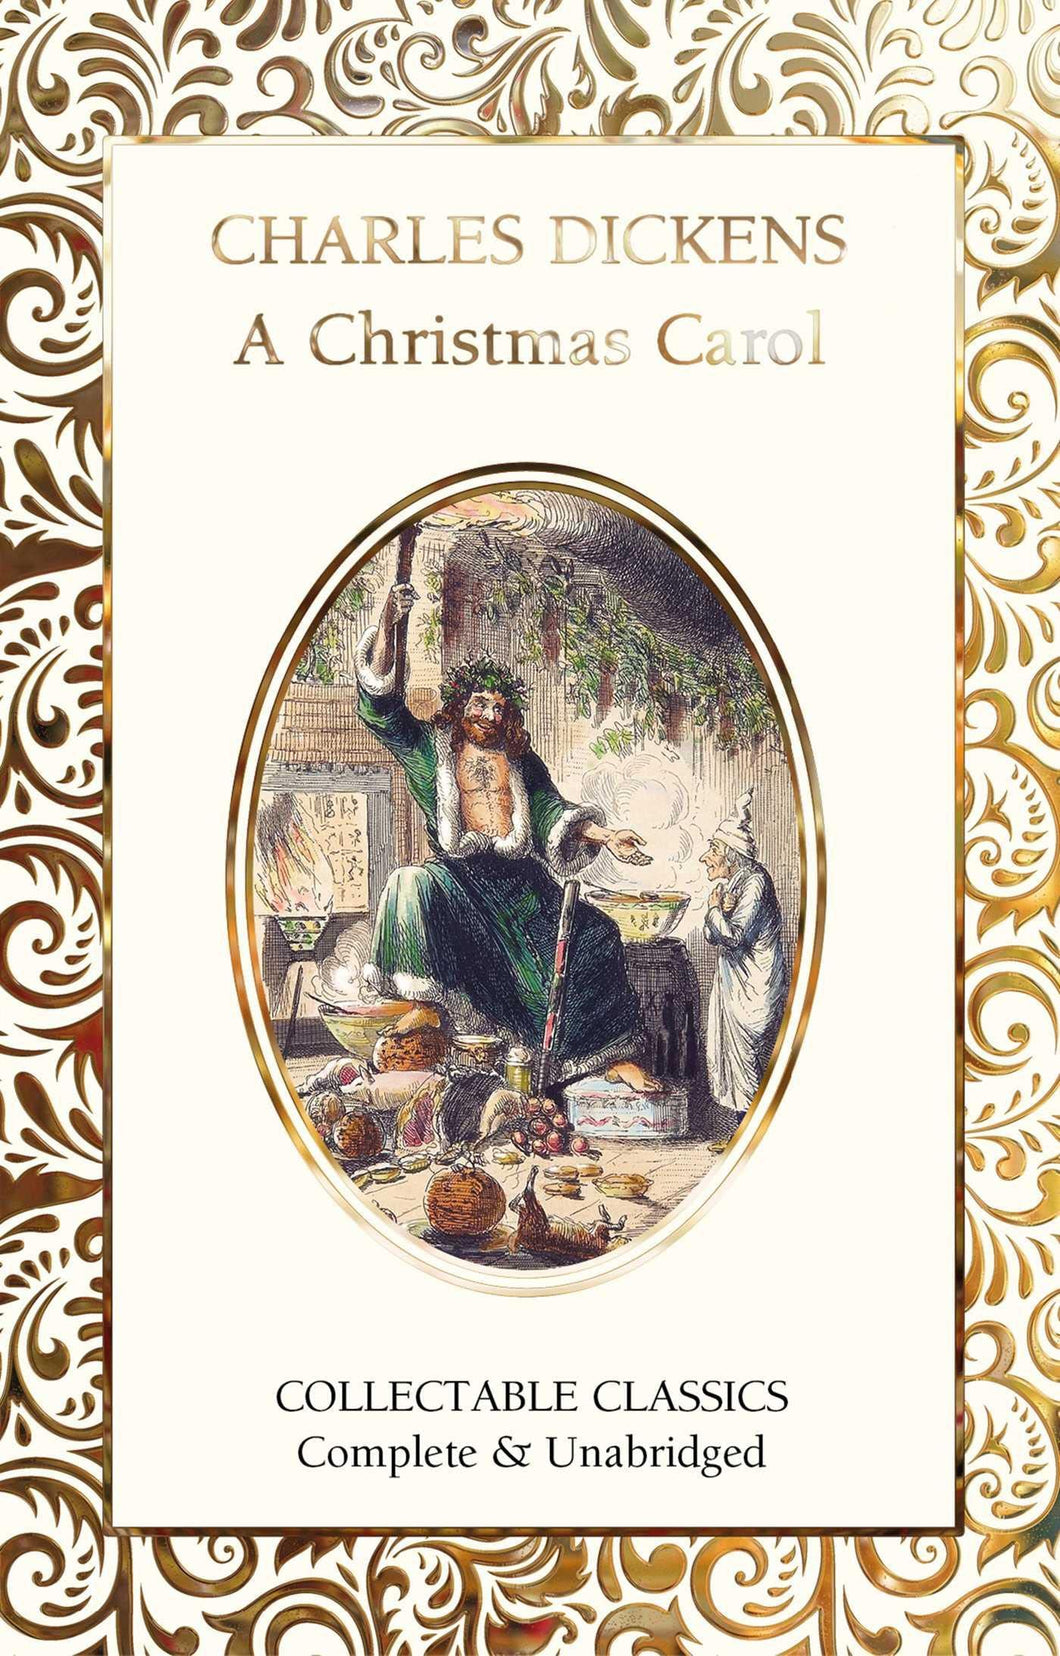 Collectable Classics: A Christmas Carol by Charles Dickens